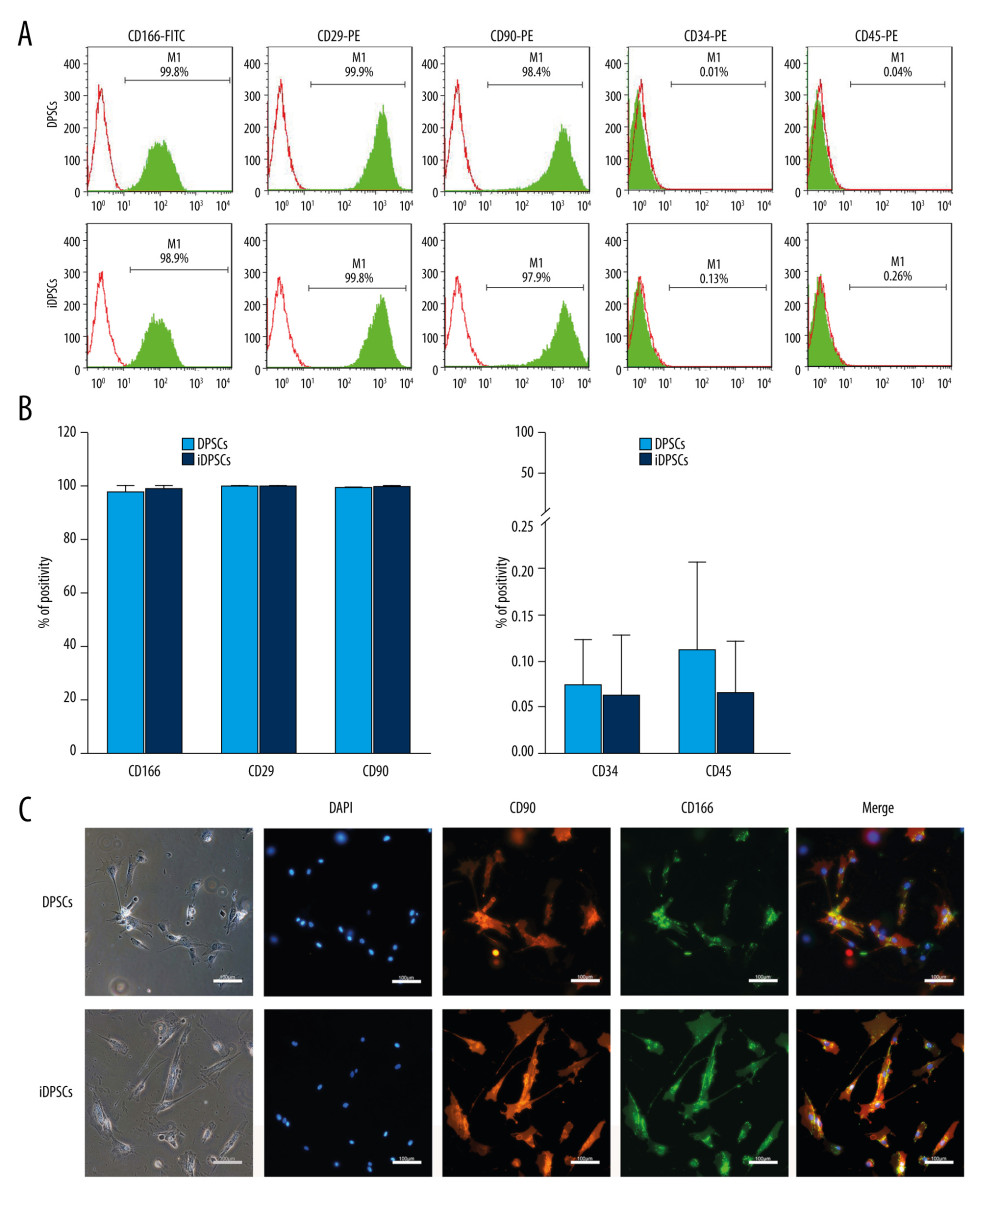 The immunophenotype characteristics of the DPSCs and iDPSCs. (A) Immunophenotype analysis by flow cytometry. The third-passage cells were incubated with monoclonal antibodies against the cell-surface marker antigens CD29, CD90, CD166, CD34, and CD45, followed by fluorescein-conjugated secondary antibodies. Both DPSCs and iDPSCs showed similar cell-surface marker expressions. (B) The percentage of positivity of the markers were calculated from 5 samples. (C) Immunofluorescence staining. The nuclei were stained with DAPI (blue). Both DPSCs and iDPSCs co-expressed CD166 and CD90 (magnification, ×20; Scale bar, 100 μm). DPSCs – dental pulp stem cells; iDPSCs – inflammatory dental pulp stem cells; MSCs – mesenchymal stem cells; DAPI – 4′,6-diamidino-2-phenylindole. (Figure were created using Adobe Photoshop CS3, Adobe Systems Software Ireland, Ltd.).